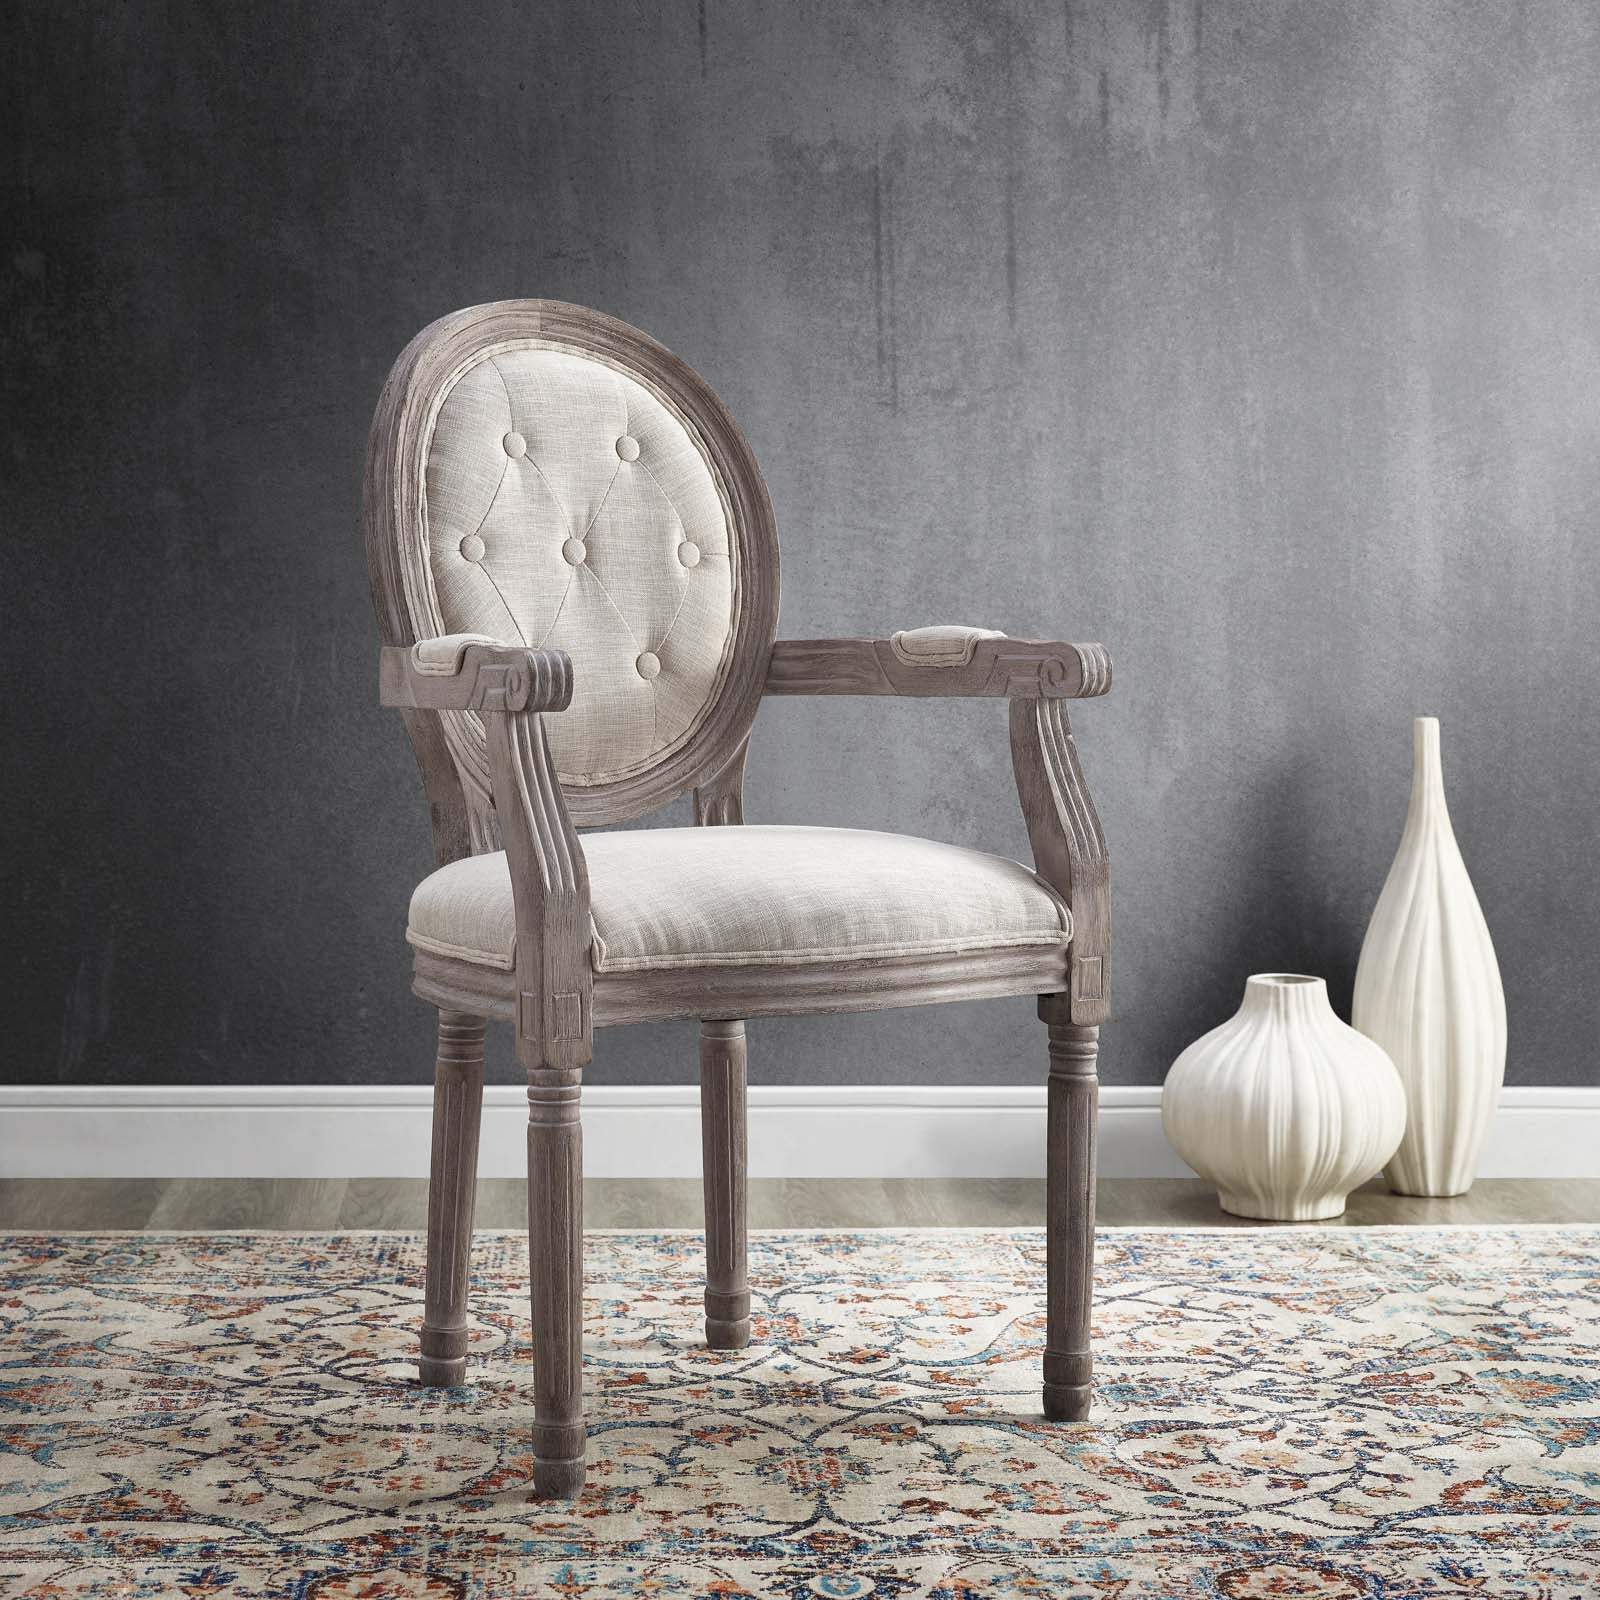 Arise Vintage French Dining Armchair - East Shore Modern Home Furnishings